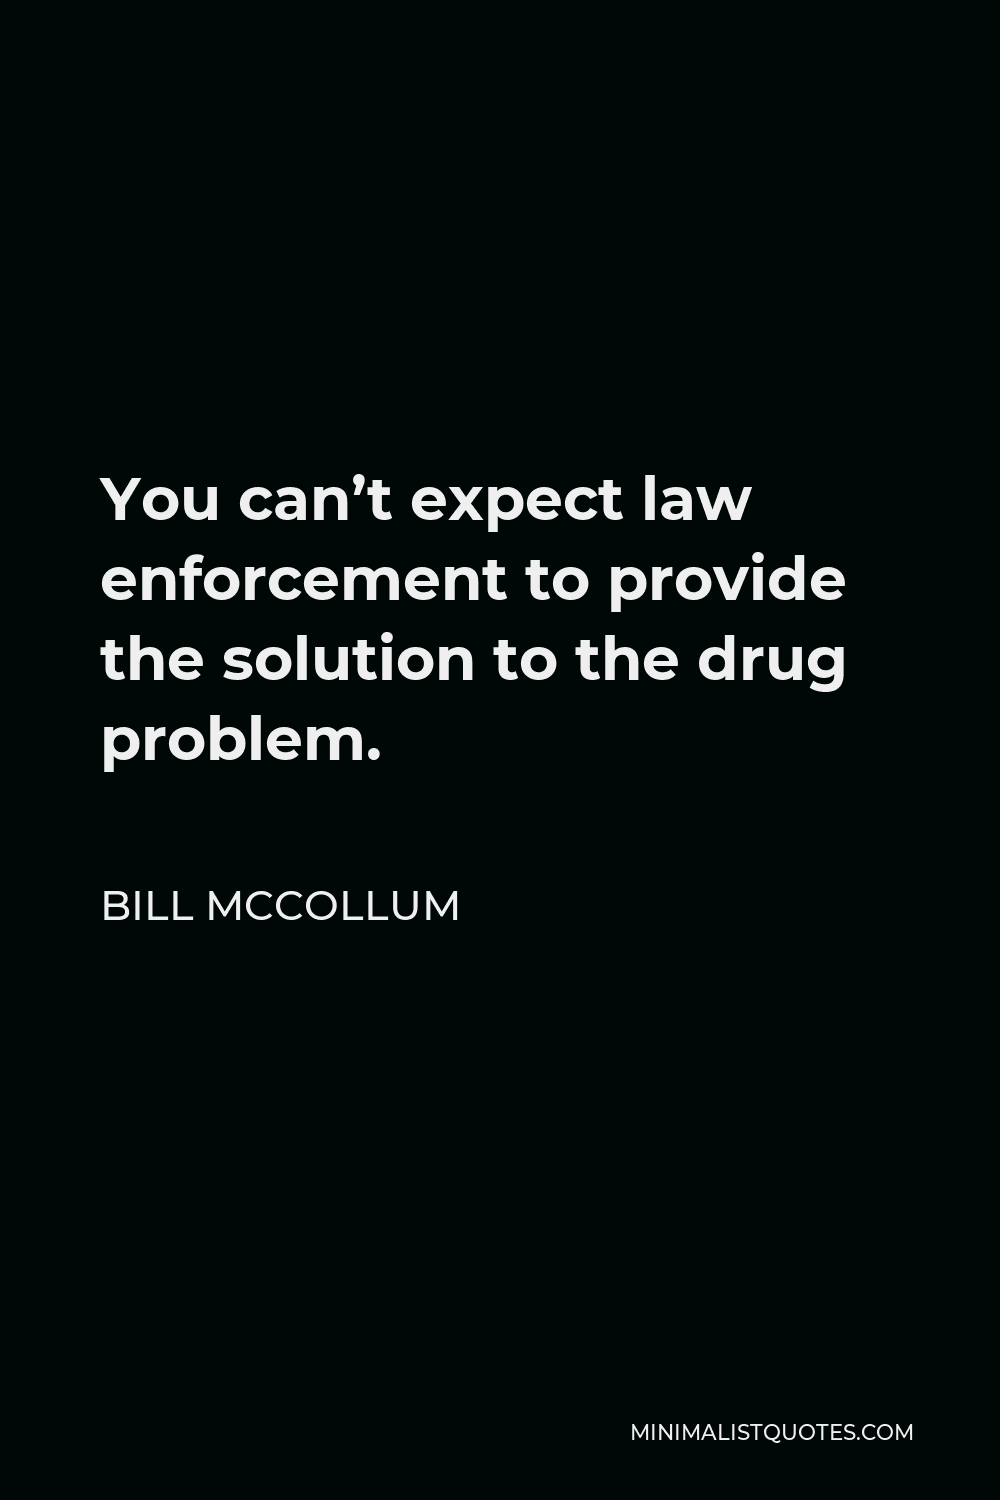 Bill McCollum Quote - You can’t expect law enforcement to provide the solution to the drug problem.